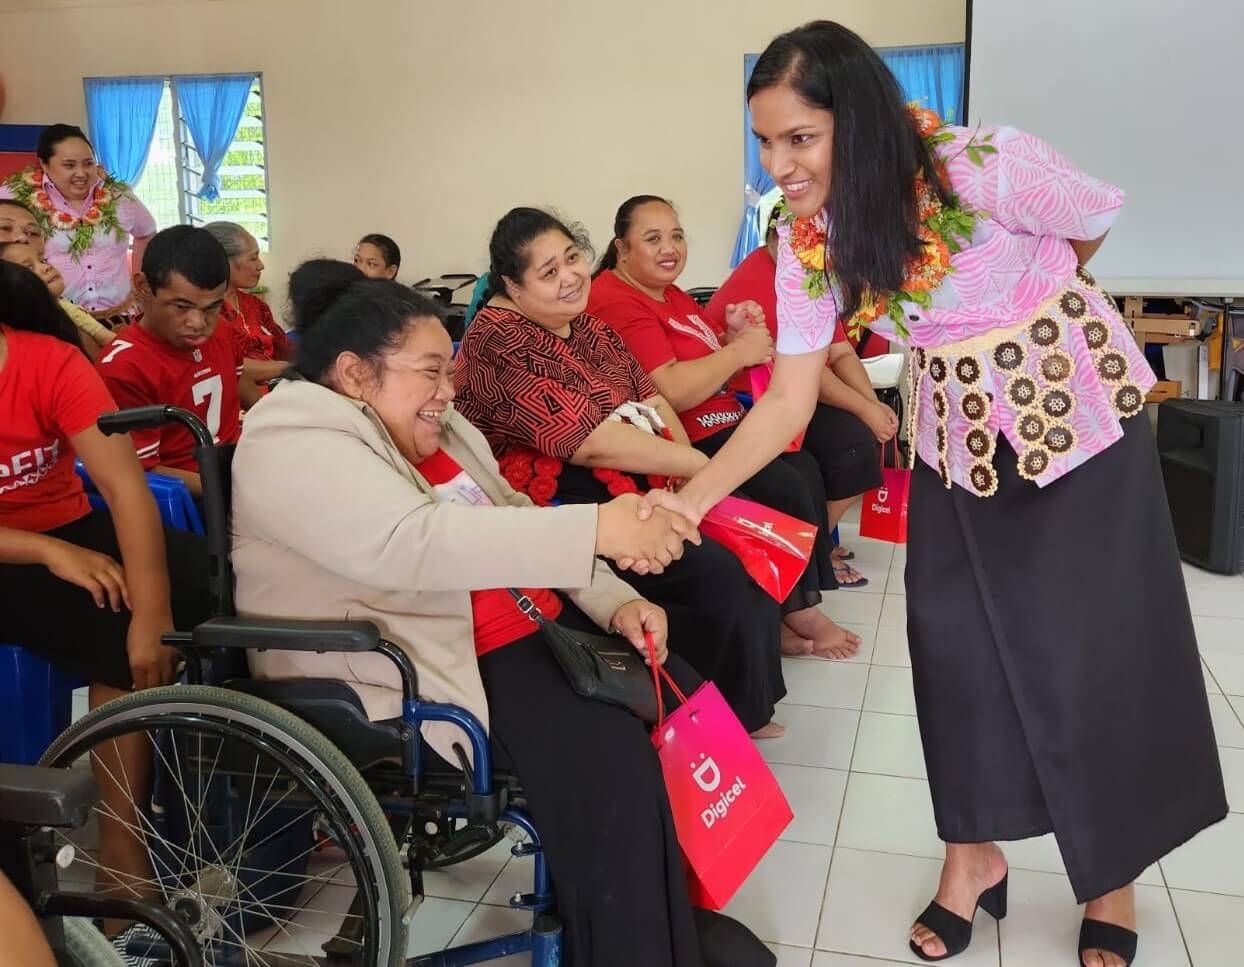 Digicel Pacific Regional CEO Shally Jannif shaking hands with a resident of the Mango Tree Center